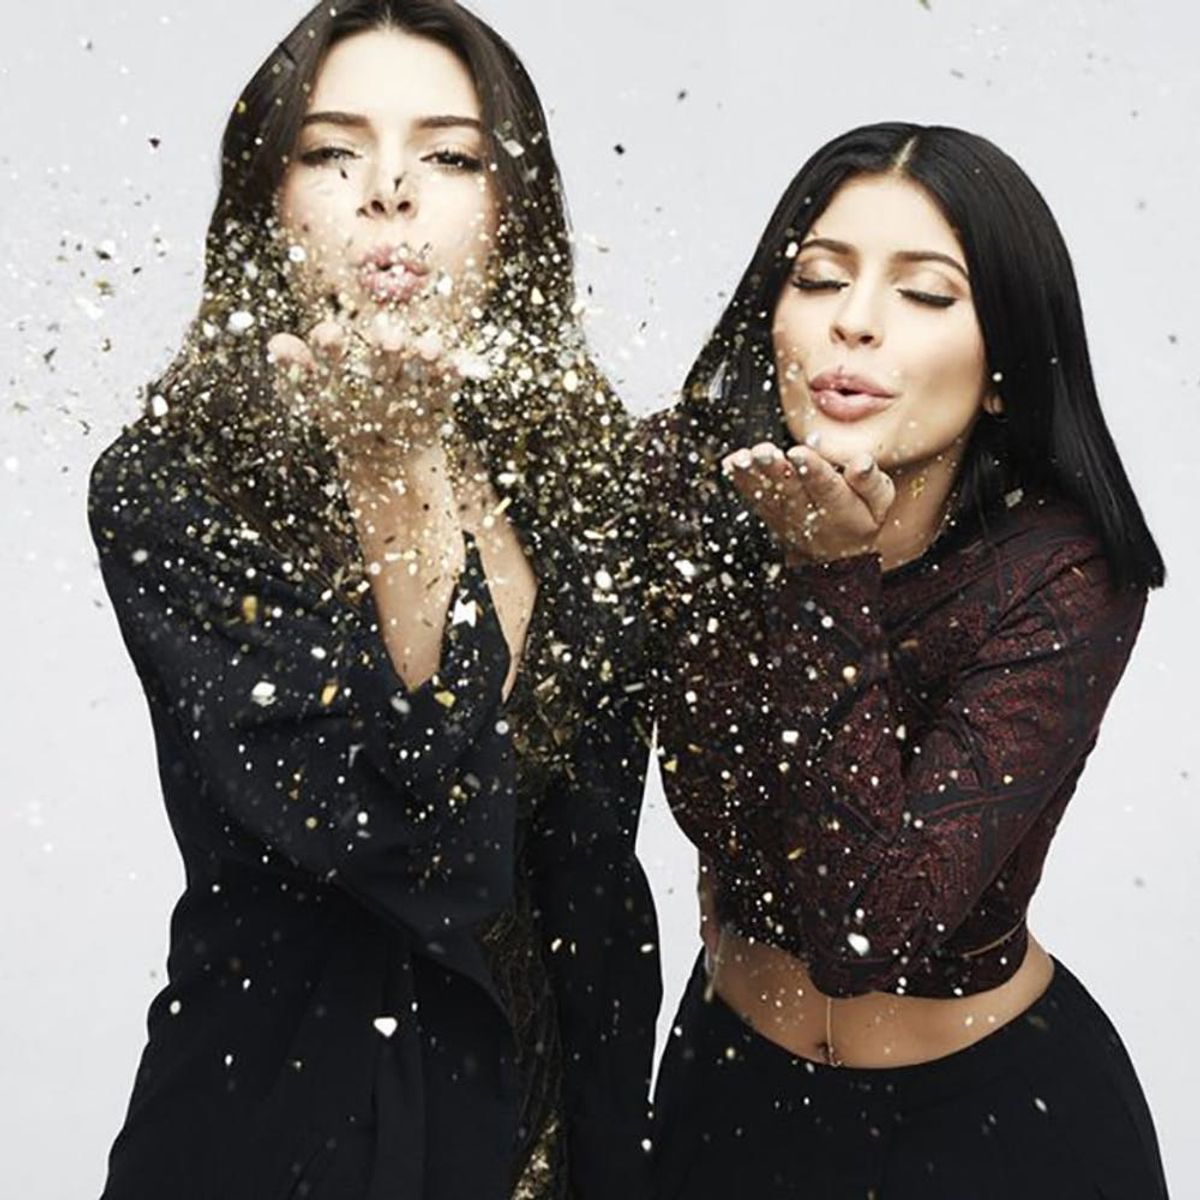 The 7 Most Over-the-Top Items from the Kardashian Sisters’ Holiday Gift Guides